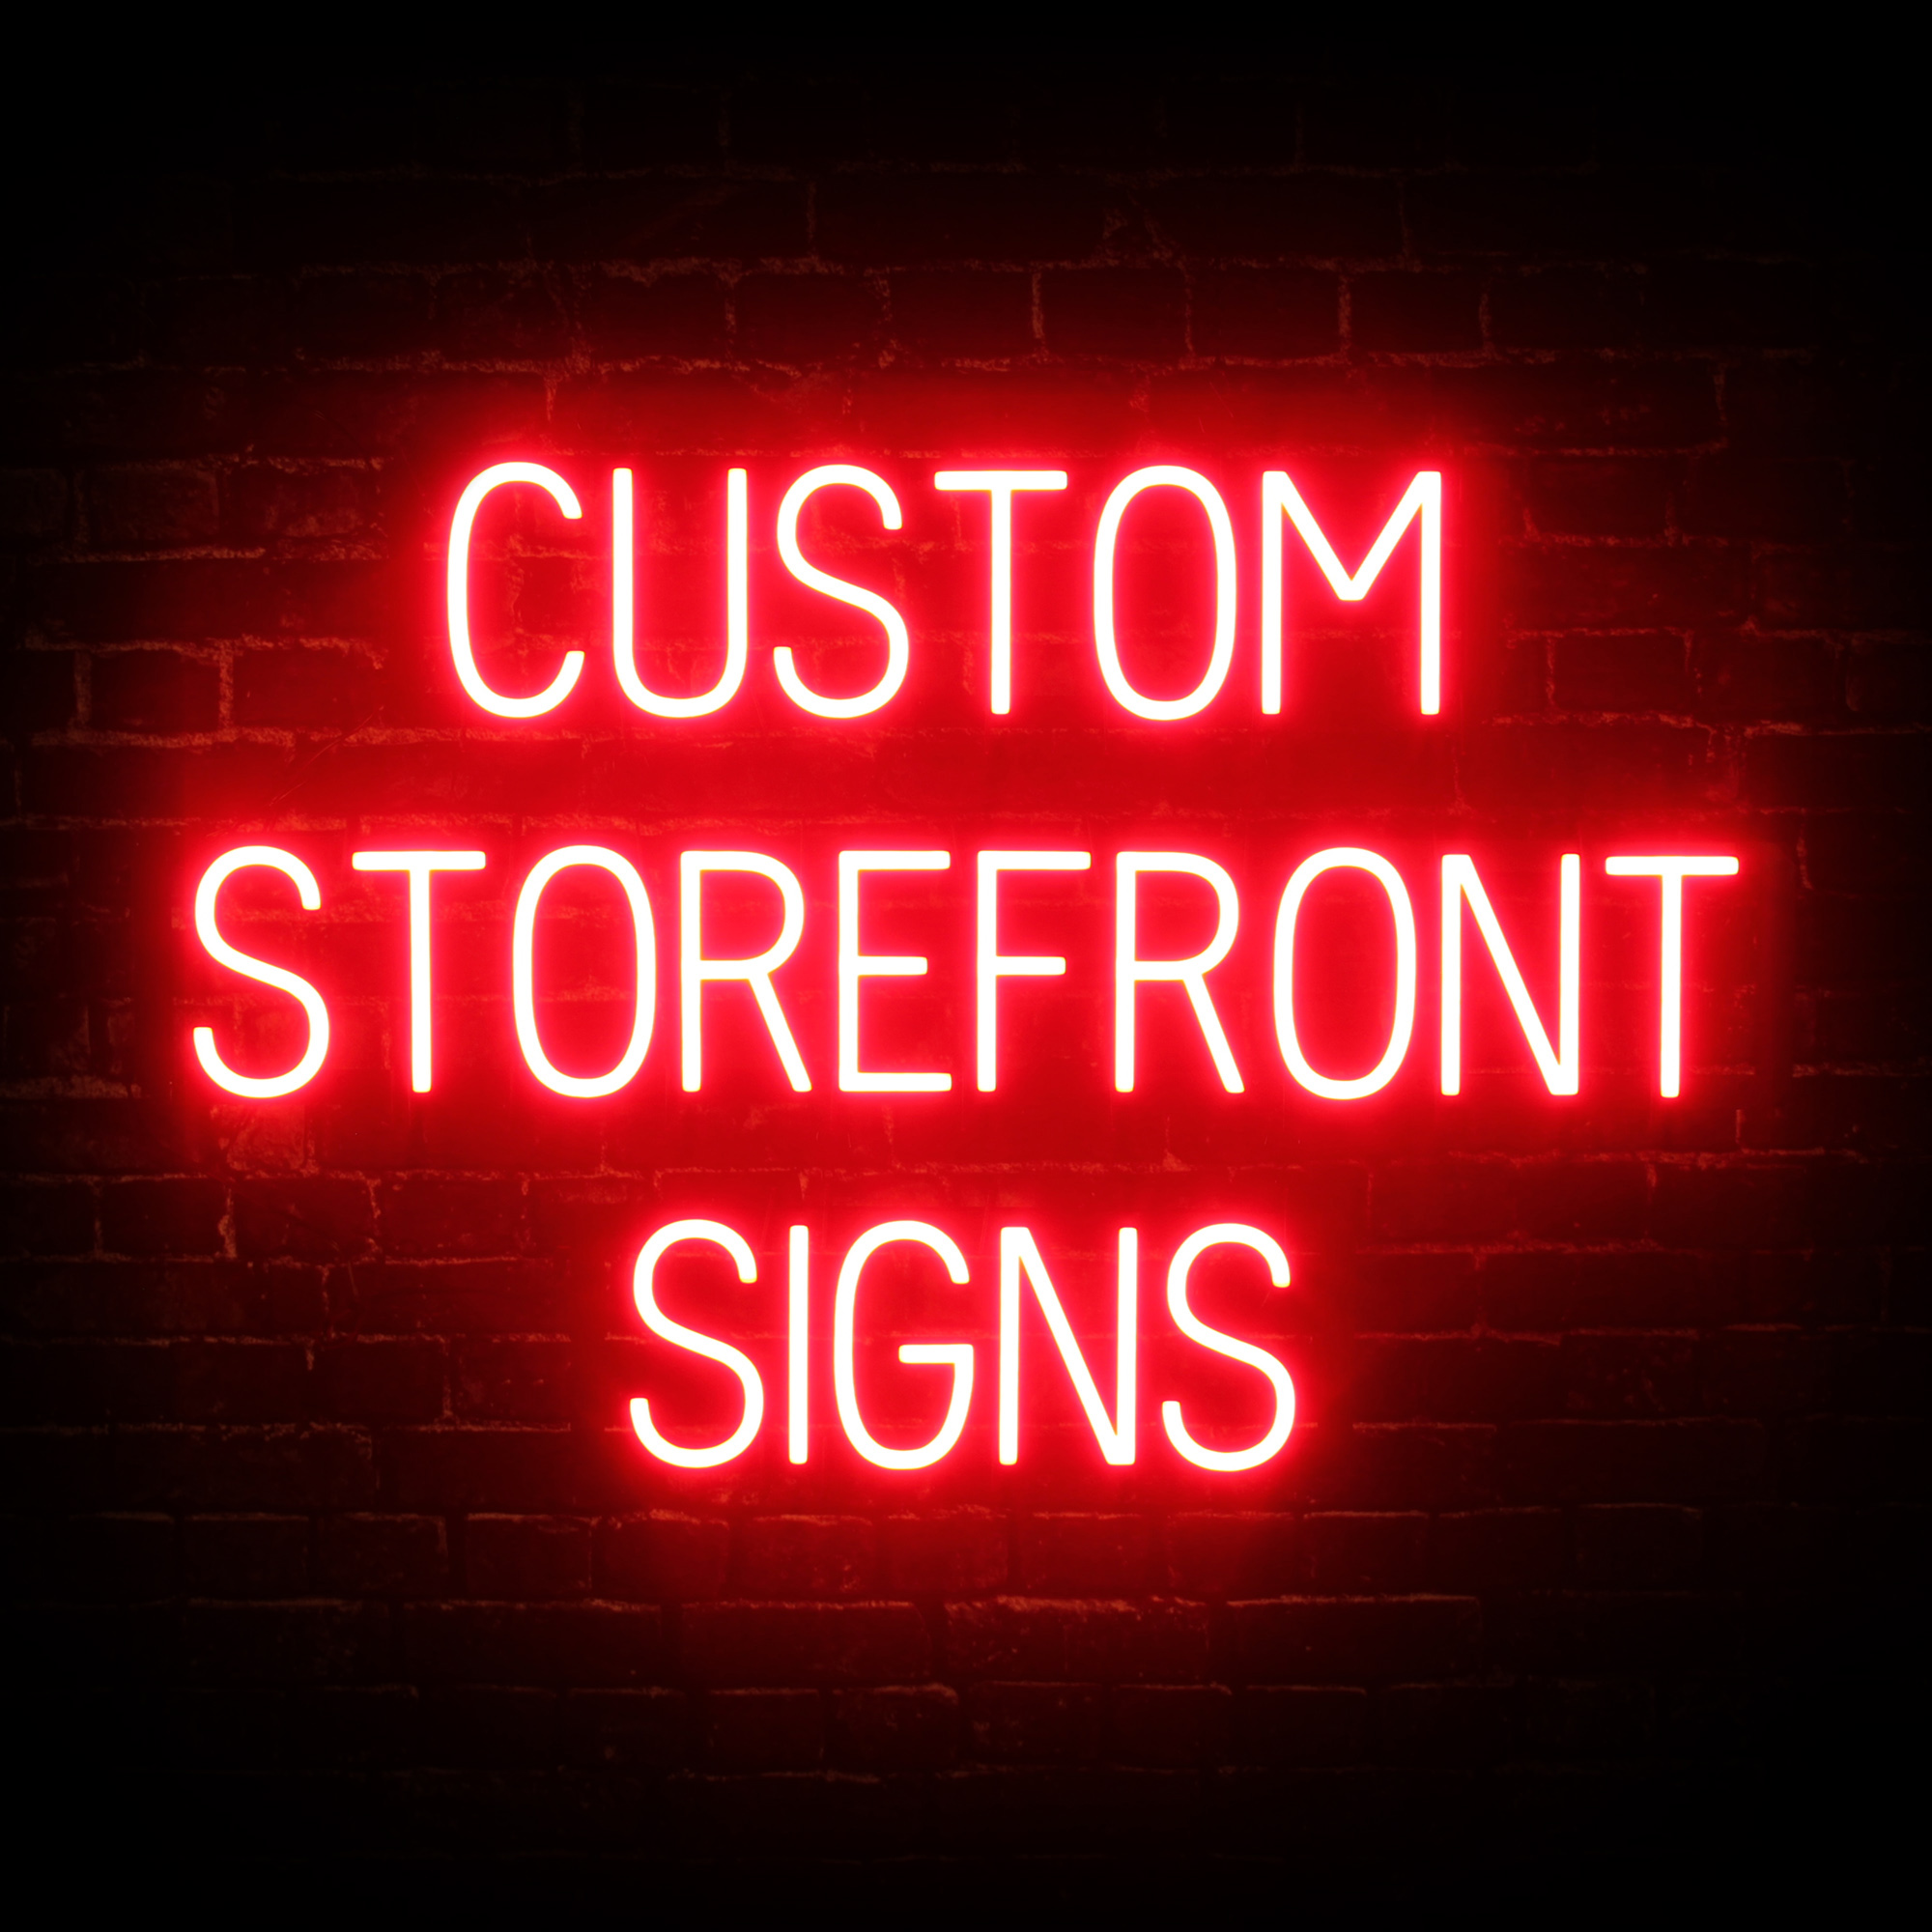 Custom Storefront Signs image in red; custom storefront signs are also available in 3 other options.